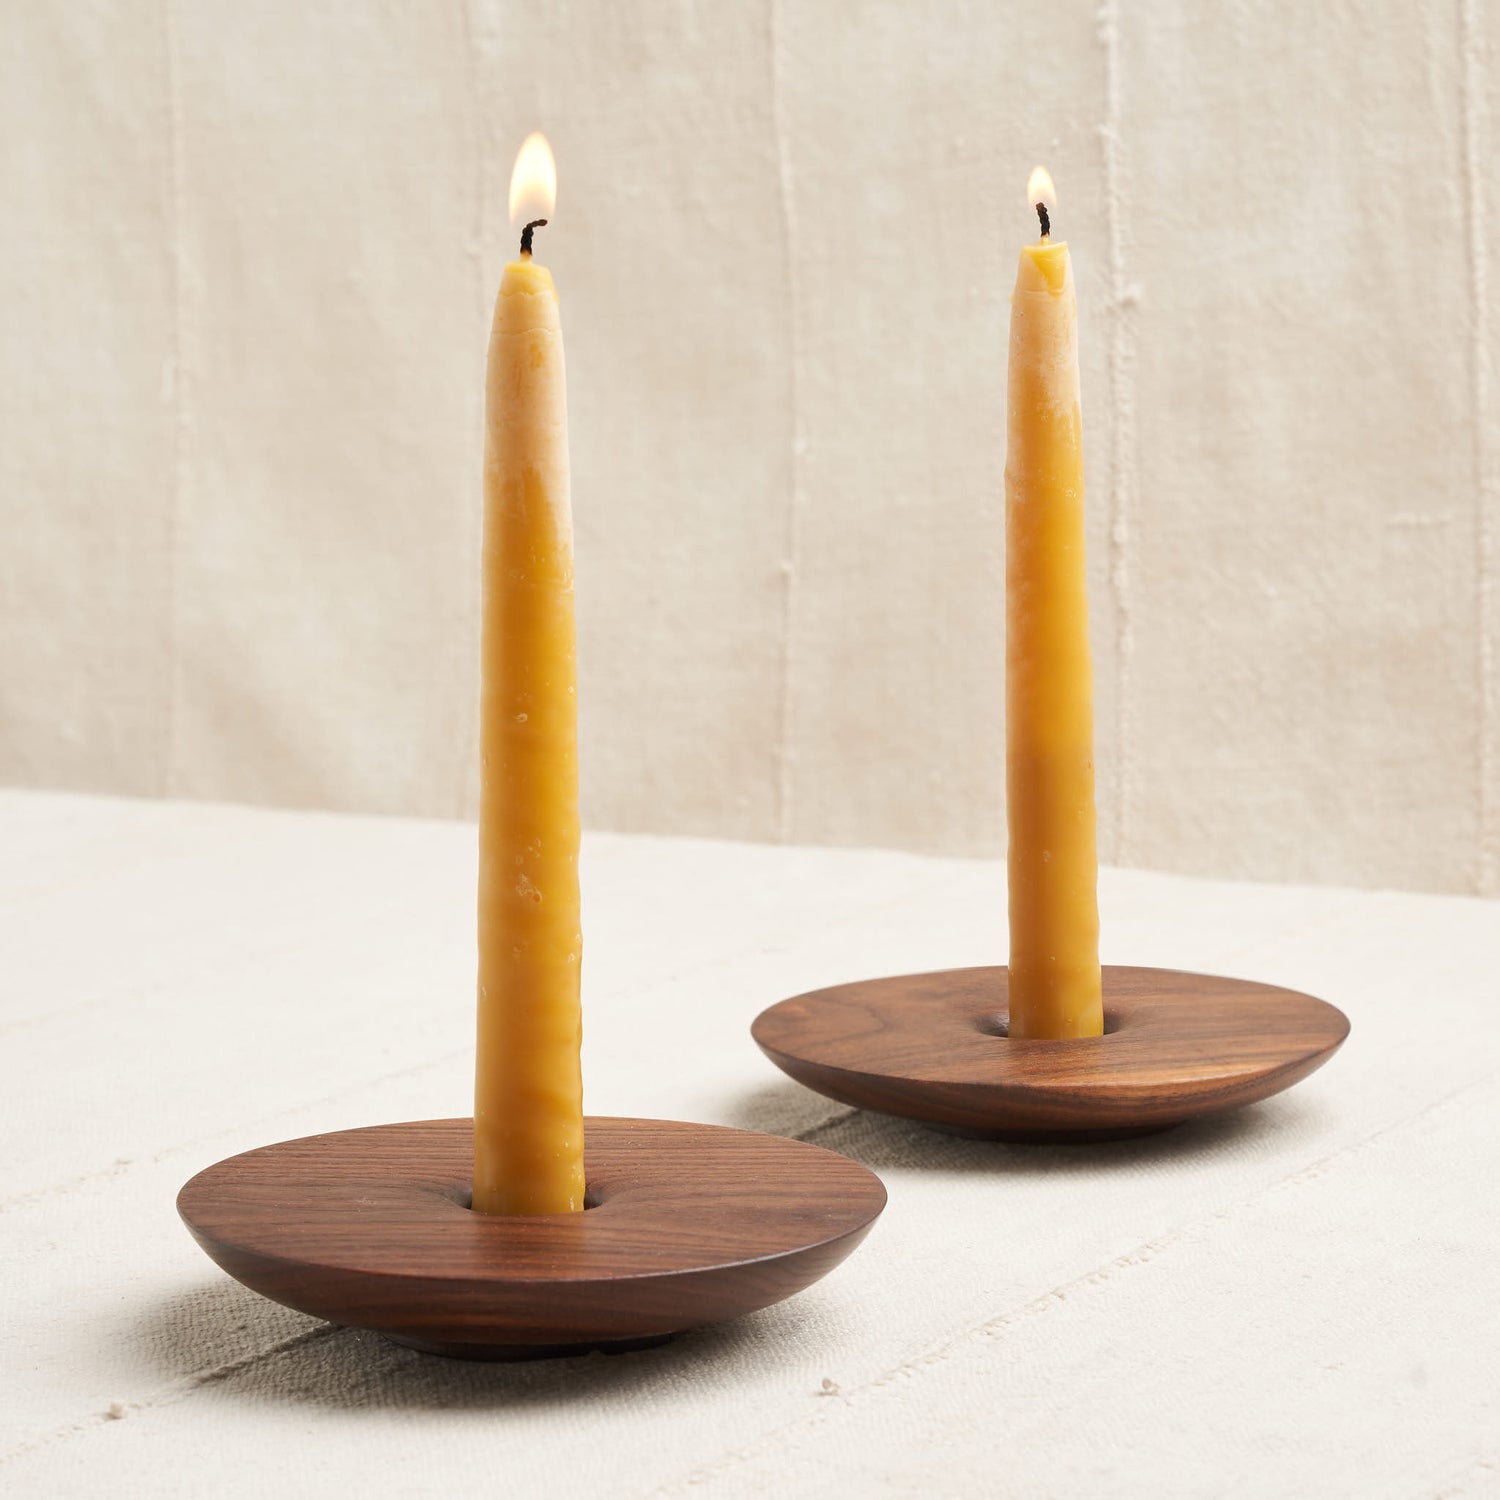 Candle Holders, Matches & Accessories For Beeswax Candles